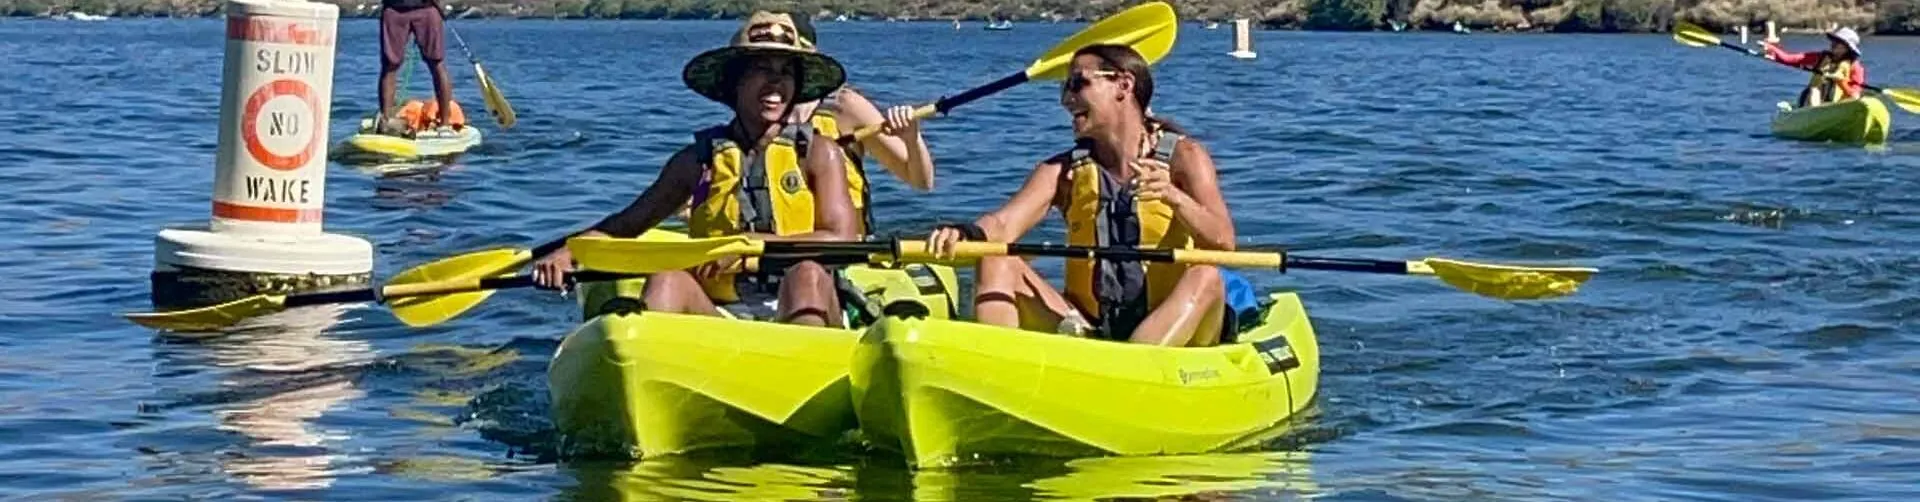 Two people kayaking on a sunny day on Saguaro lake. Riverbound Sports Paddle Company